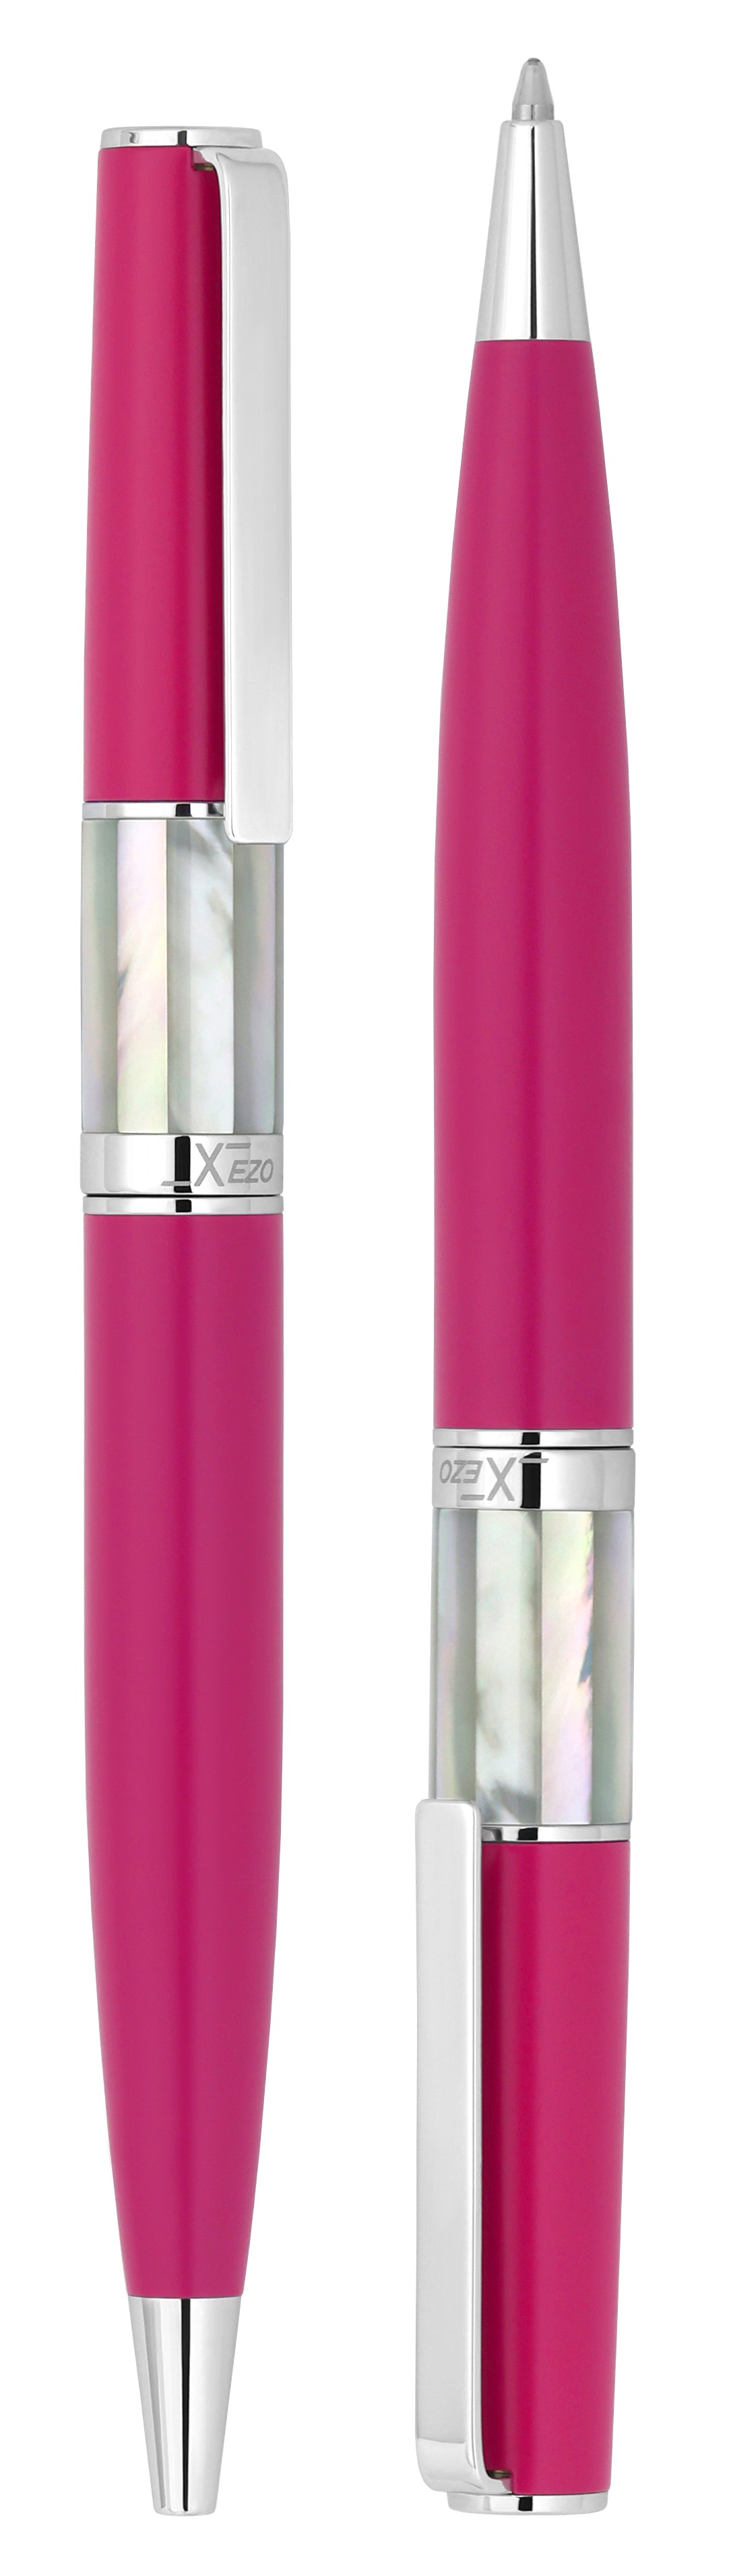 Xezo - Vertical view of two Speed Master Cerise B-WC Ballpoint pens; the one on the left has the point in, and the one on the right has the point out